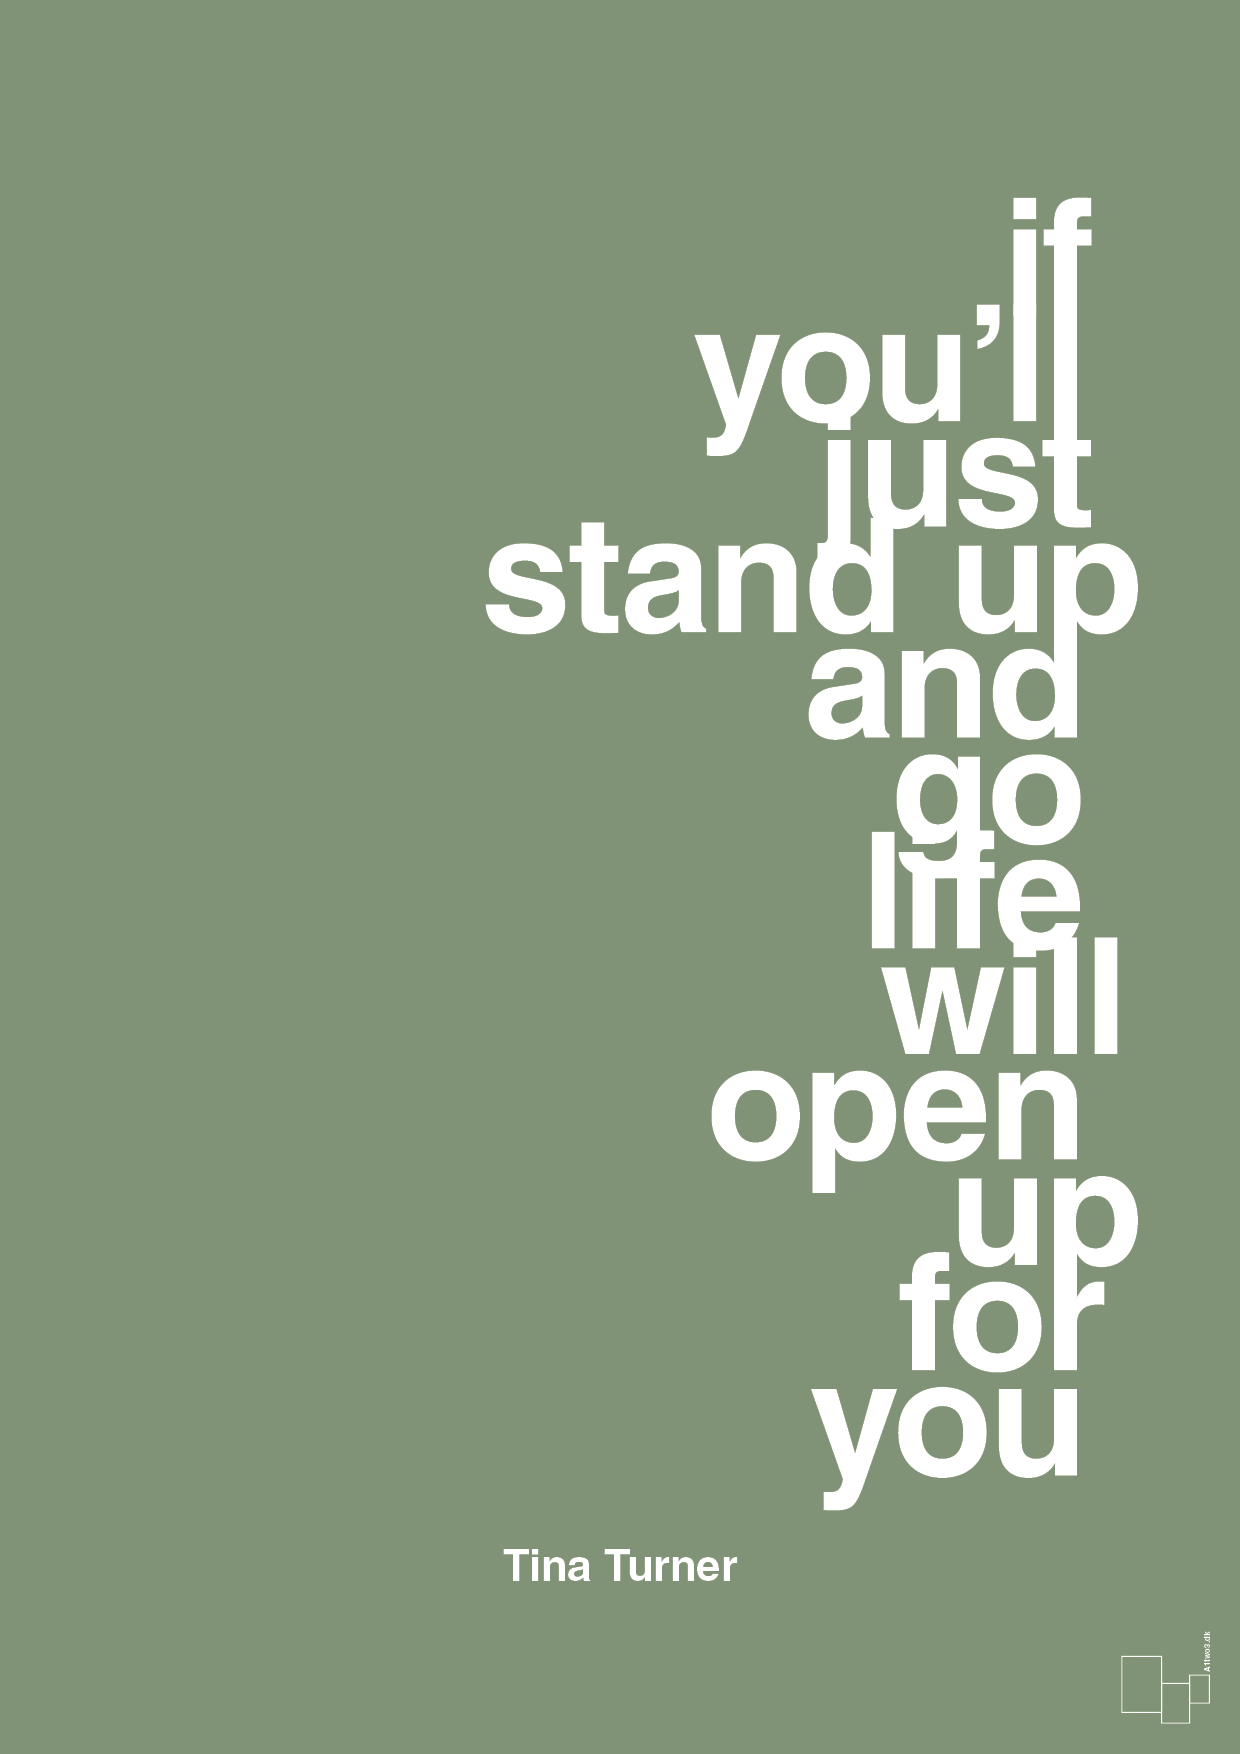 if you’ll just stand up and go life will open up for you - Plakat med Citater i Jade